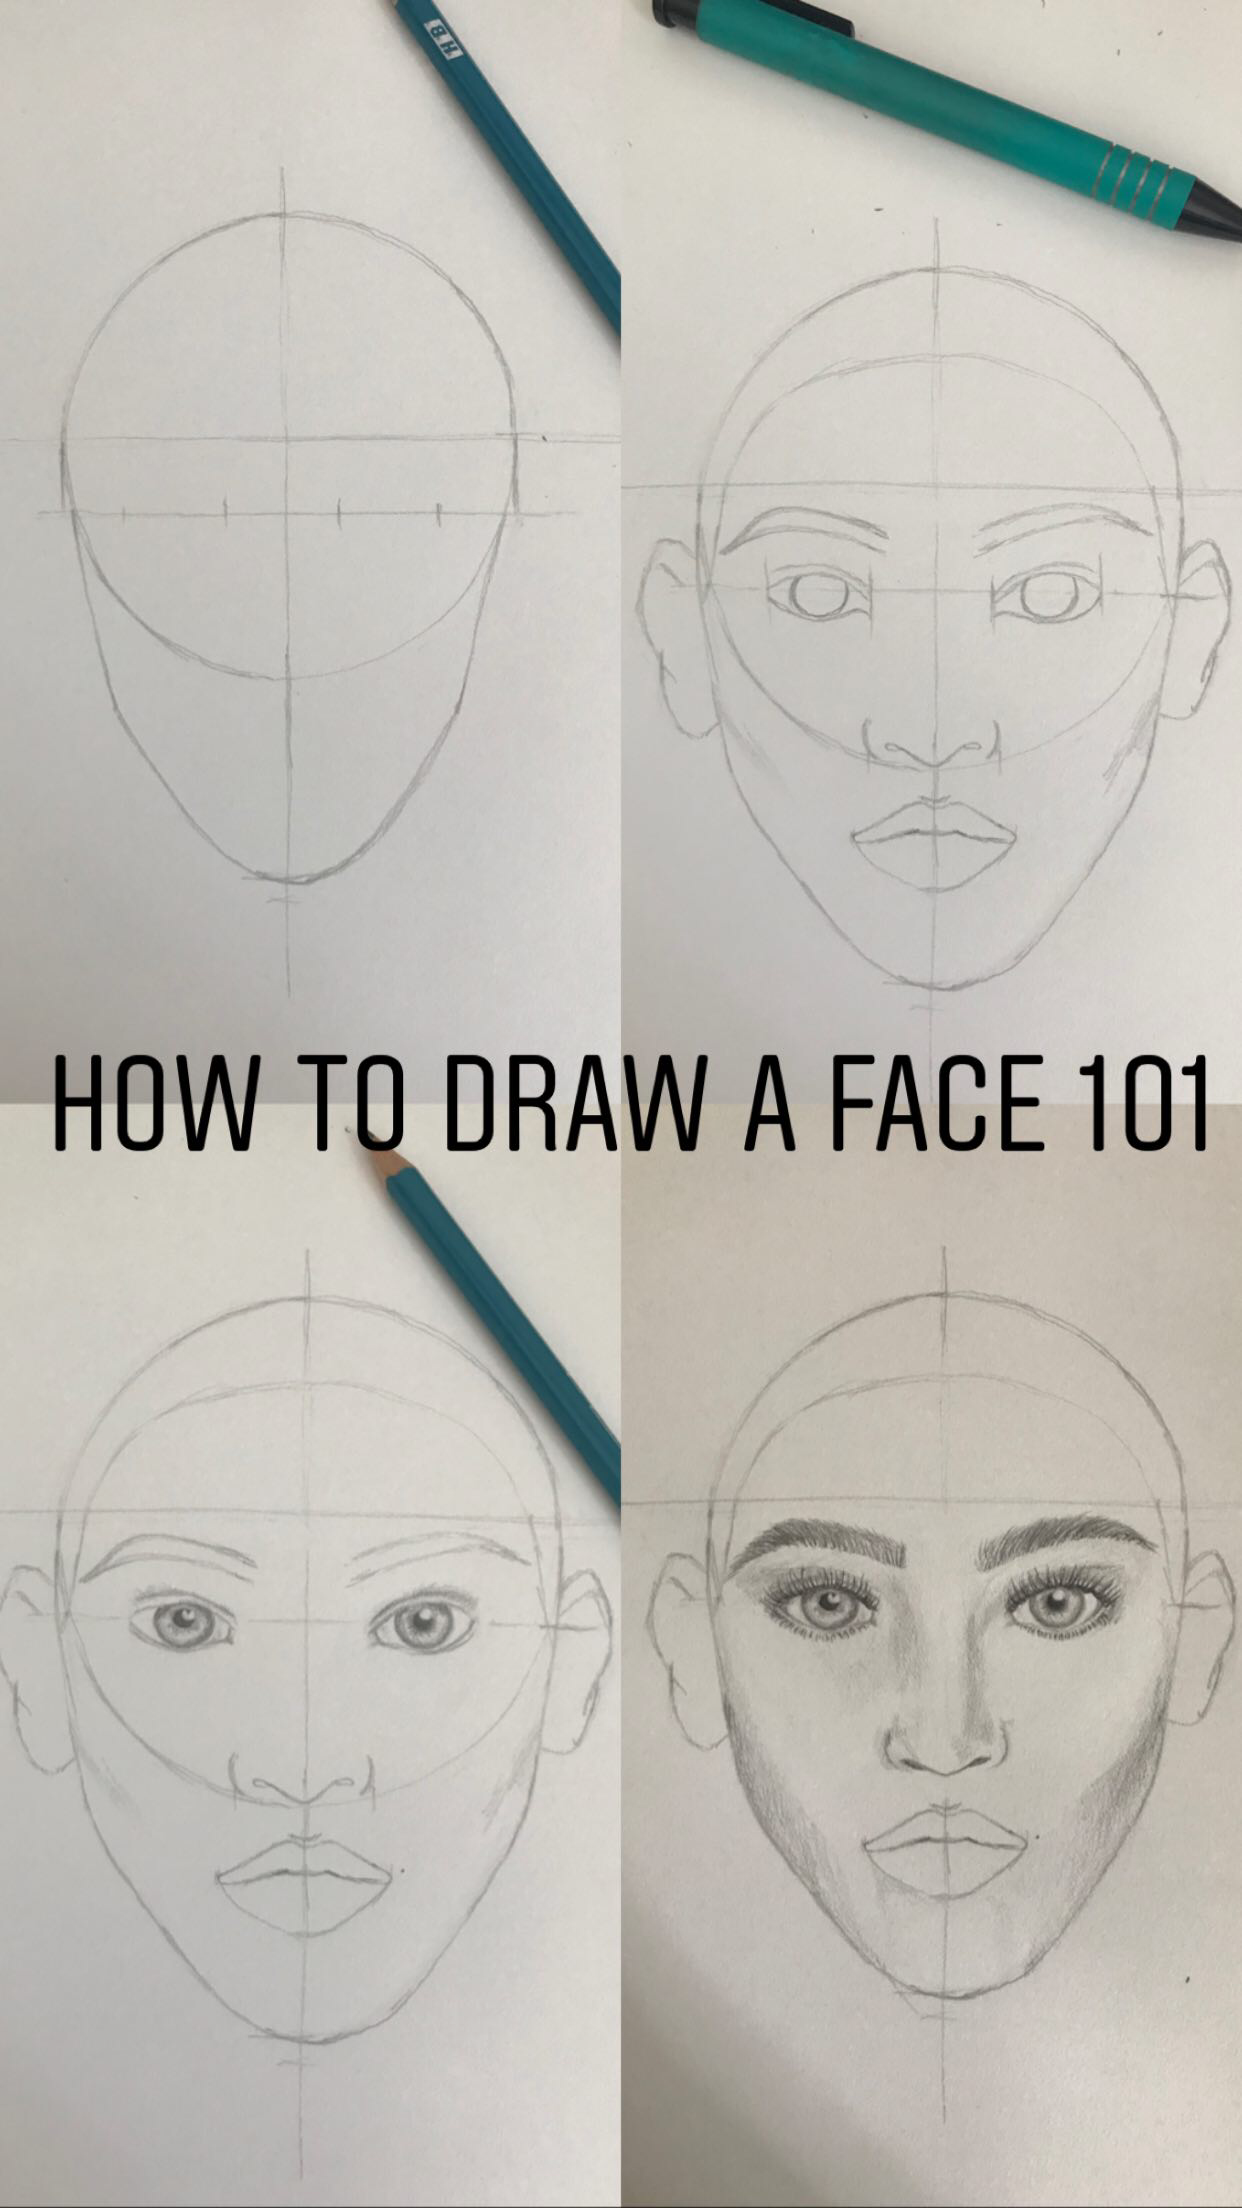 How to draw a face - 101